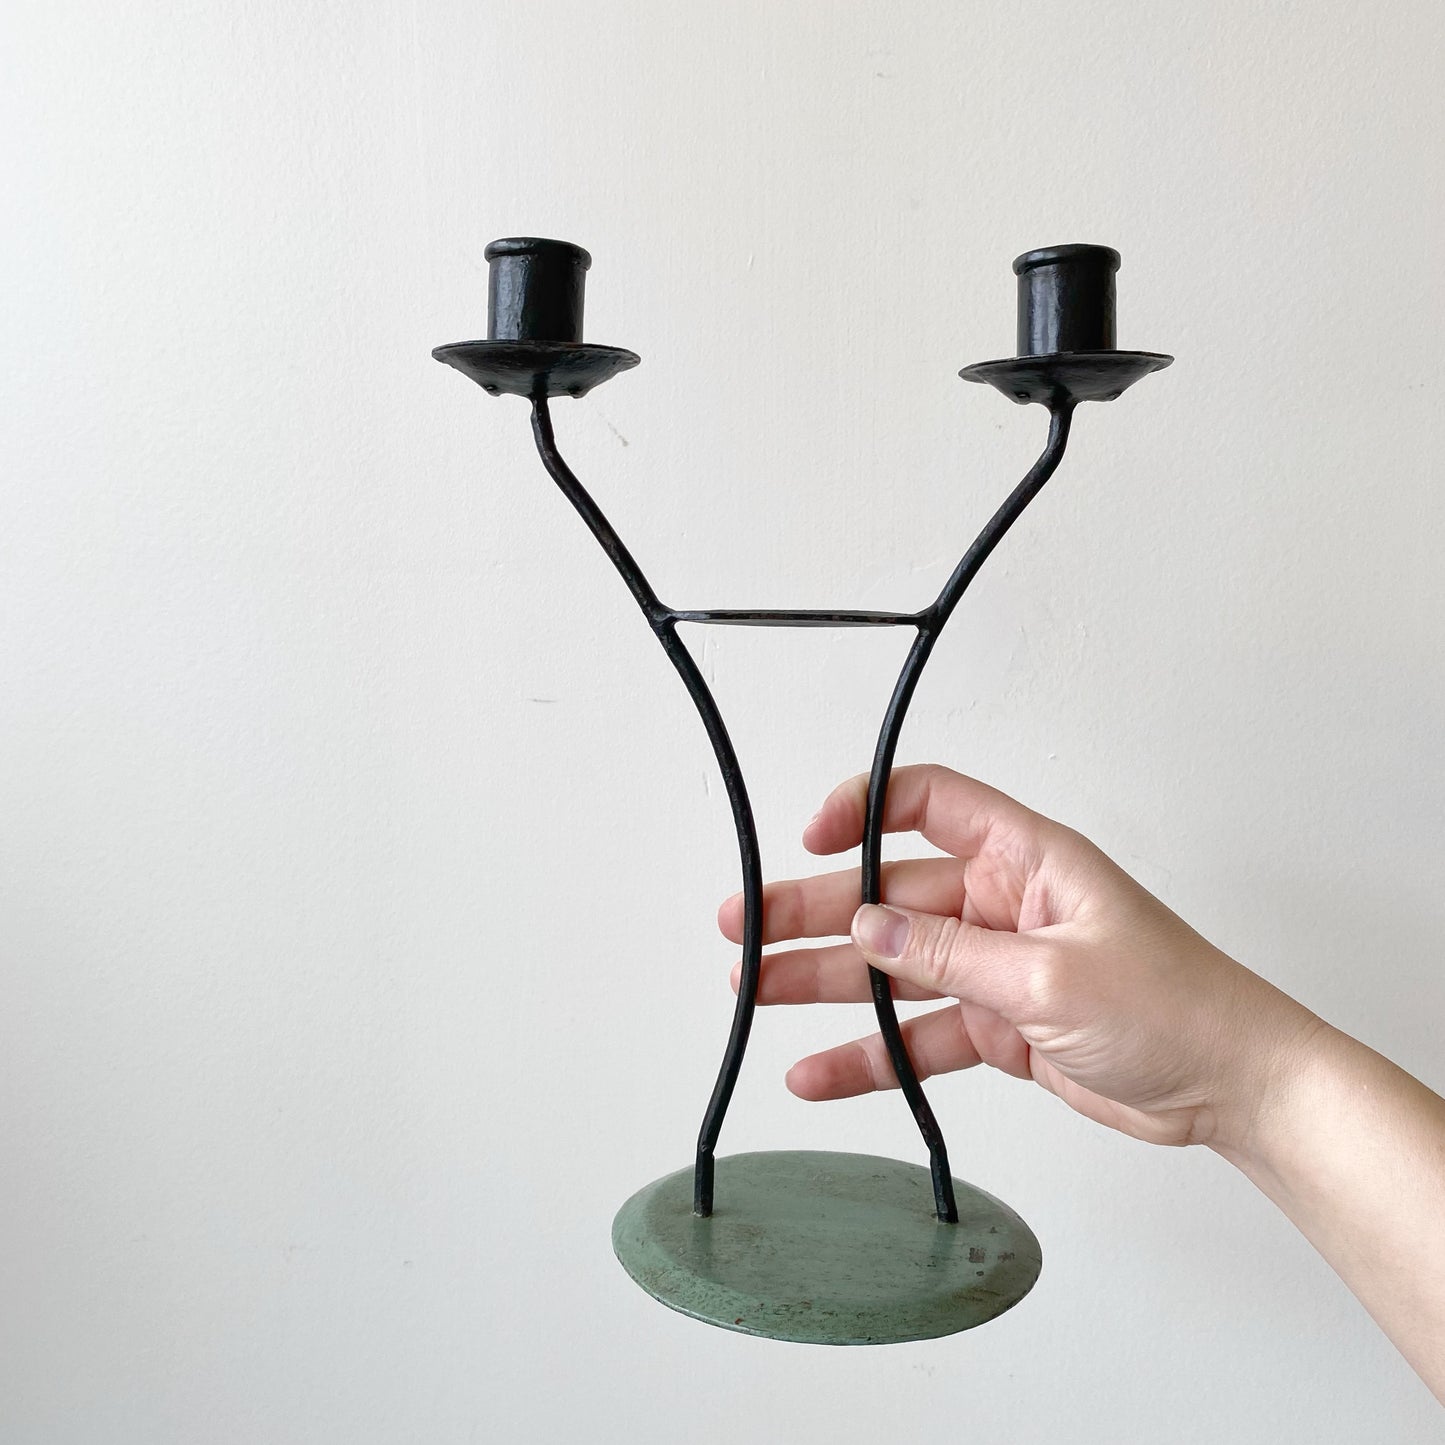 Vintage Handcrafted Candleholder Duo